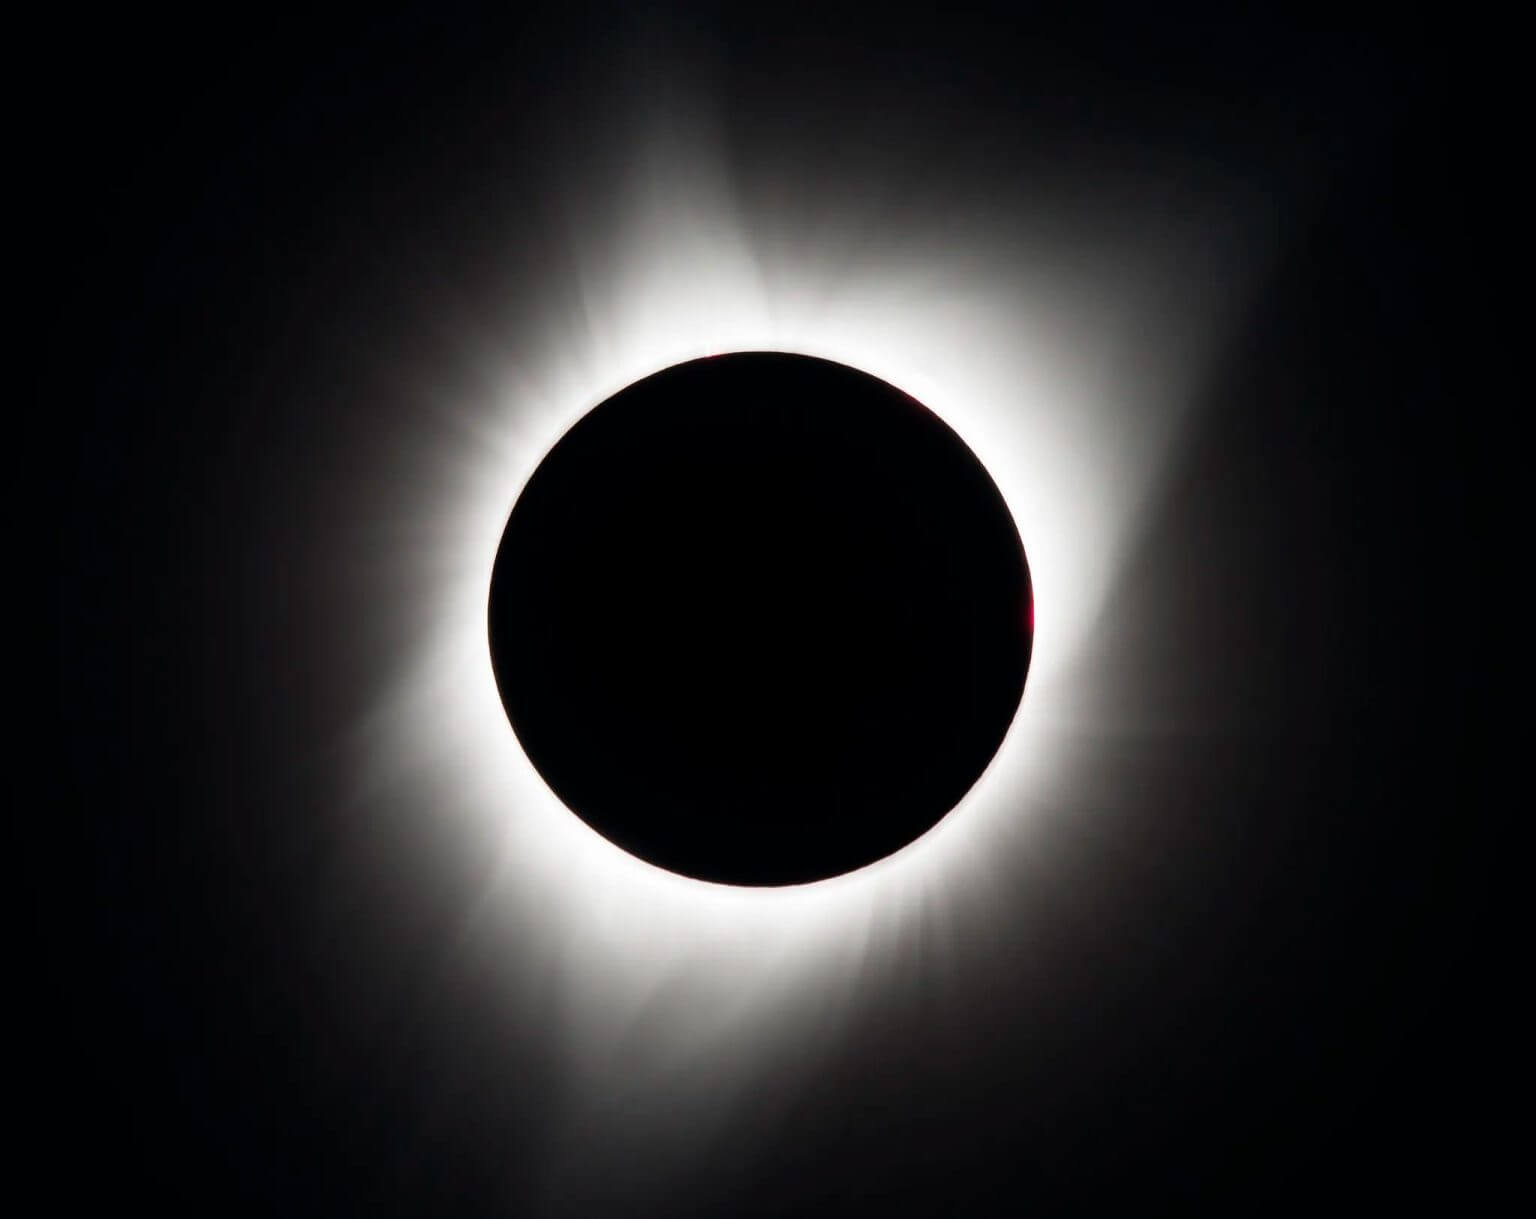 The August 21, 2017 total solar eclipse was photographed from Madras, Oregon. The black circle in the middle is the moon. Around it are streams of white light that belong to the sun's outer atmosphere, called the corona. Credit: NASA/Aubrey Gamaniani